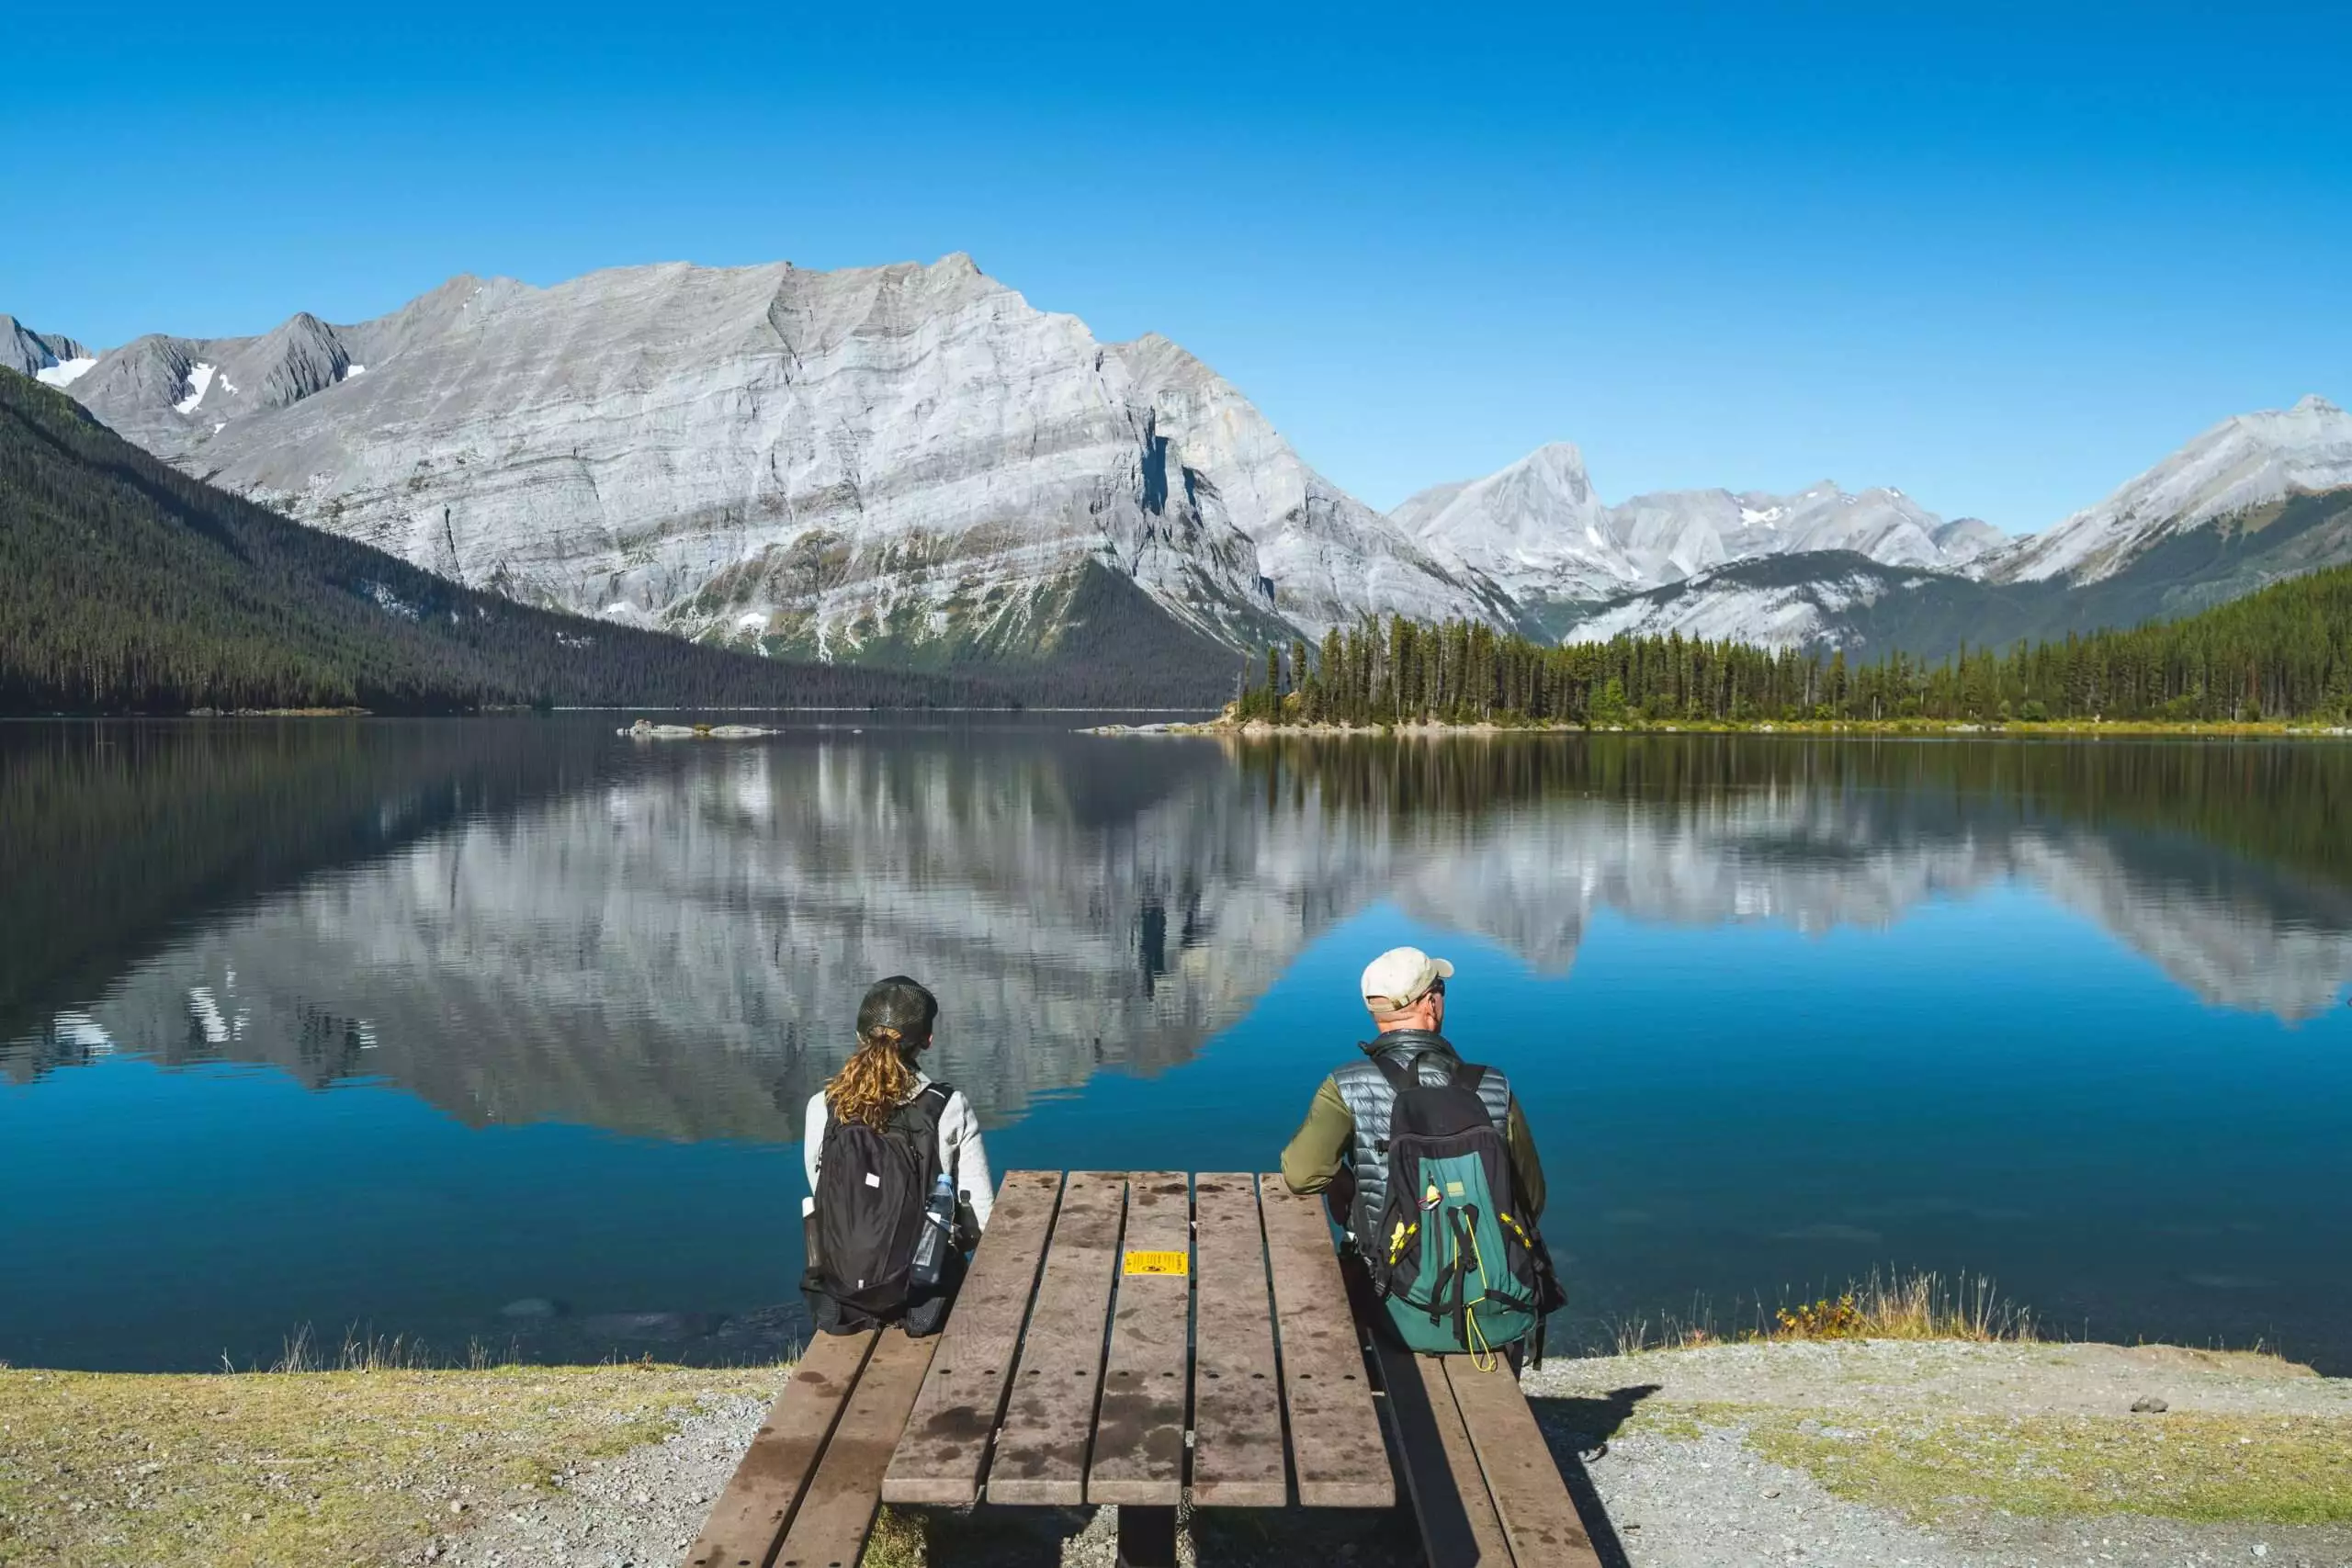 Kananaskis Park - 7 Best Features You Need To Know! 2